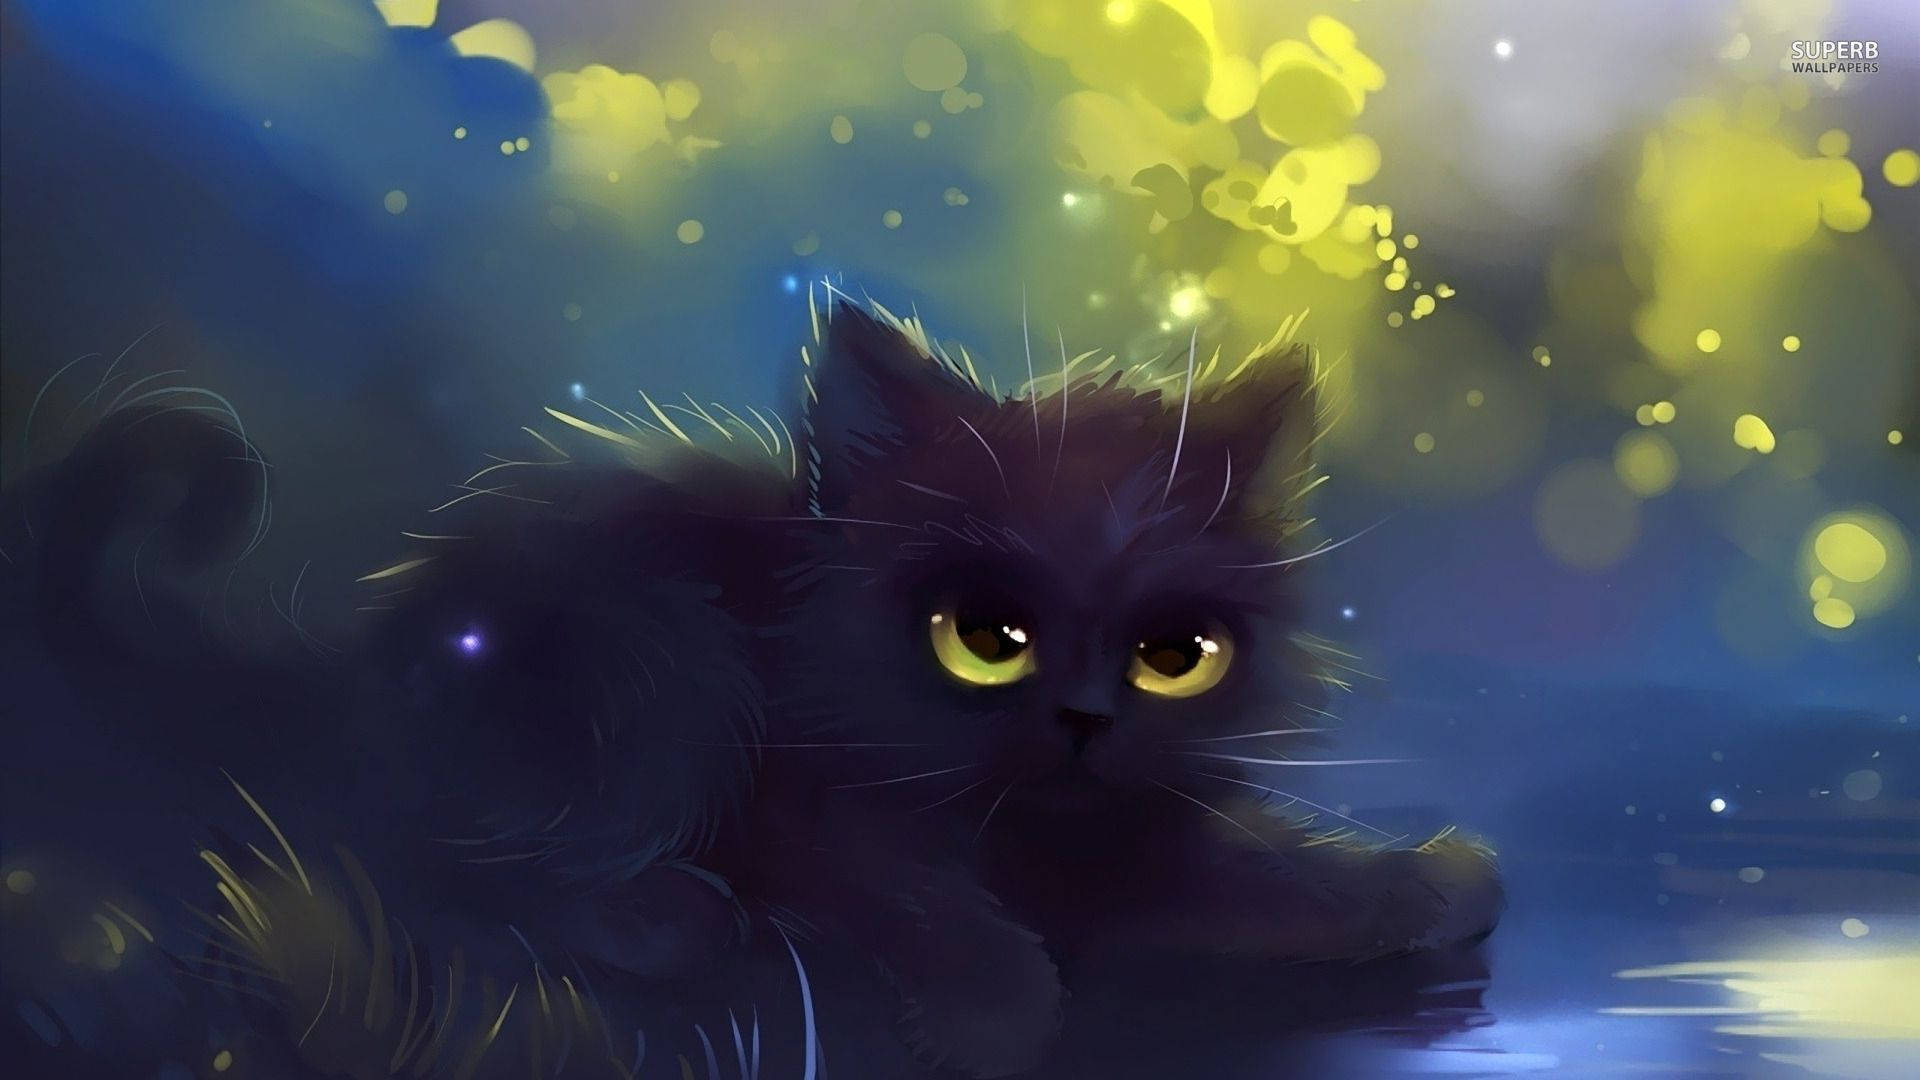 Cat With Yellow Eyes Surrounded By Clouds Wallpaper | Wallpapers.com